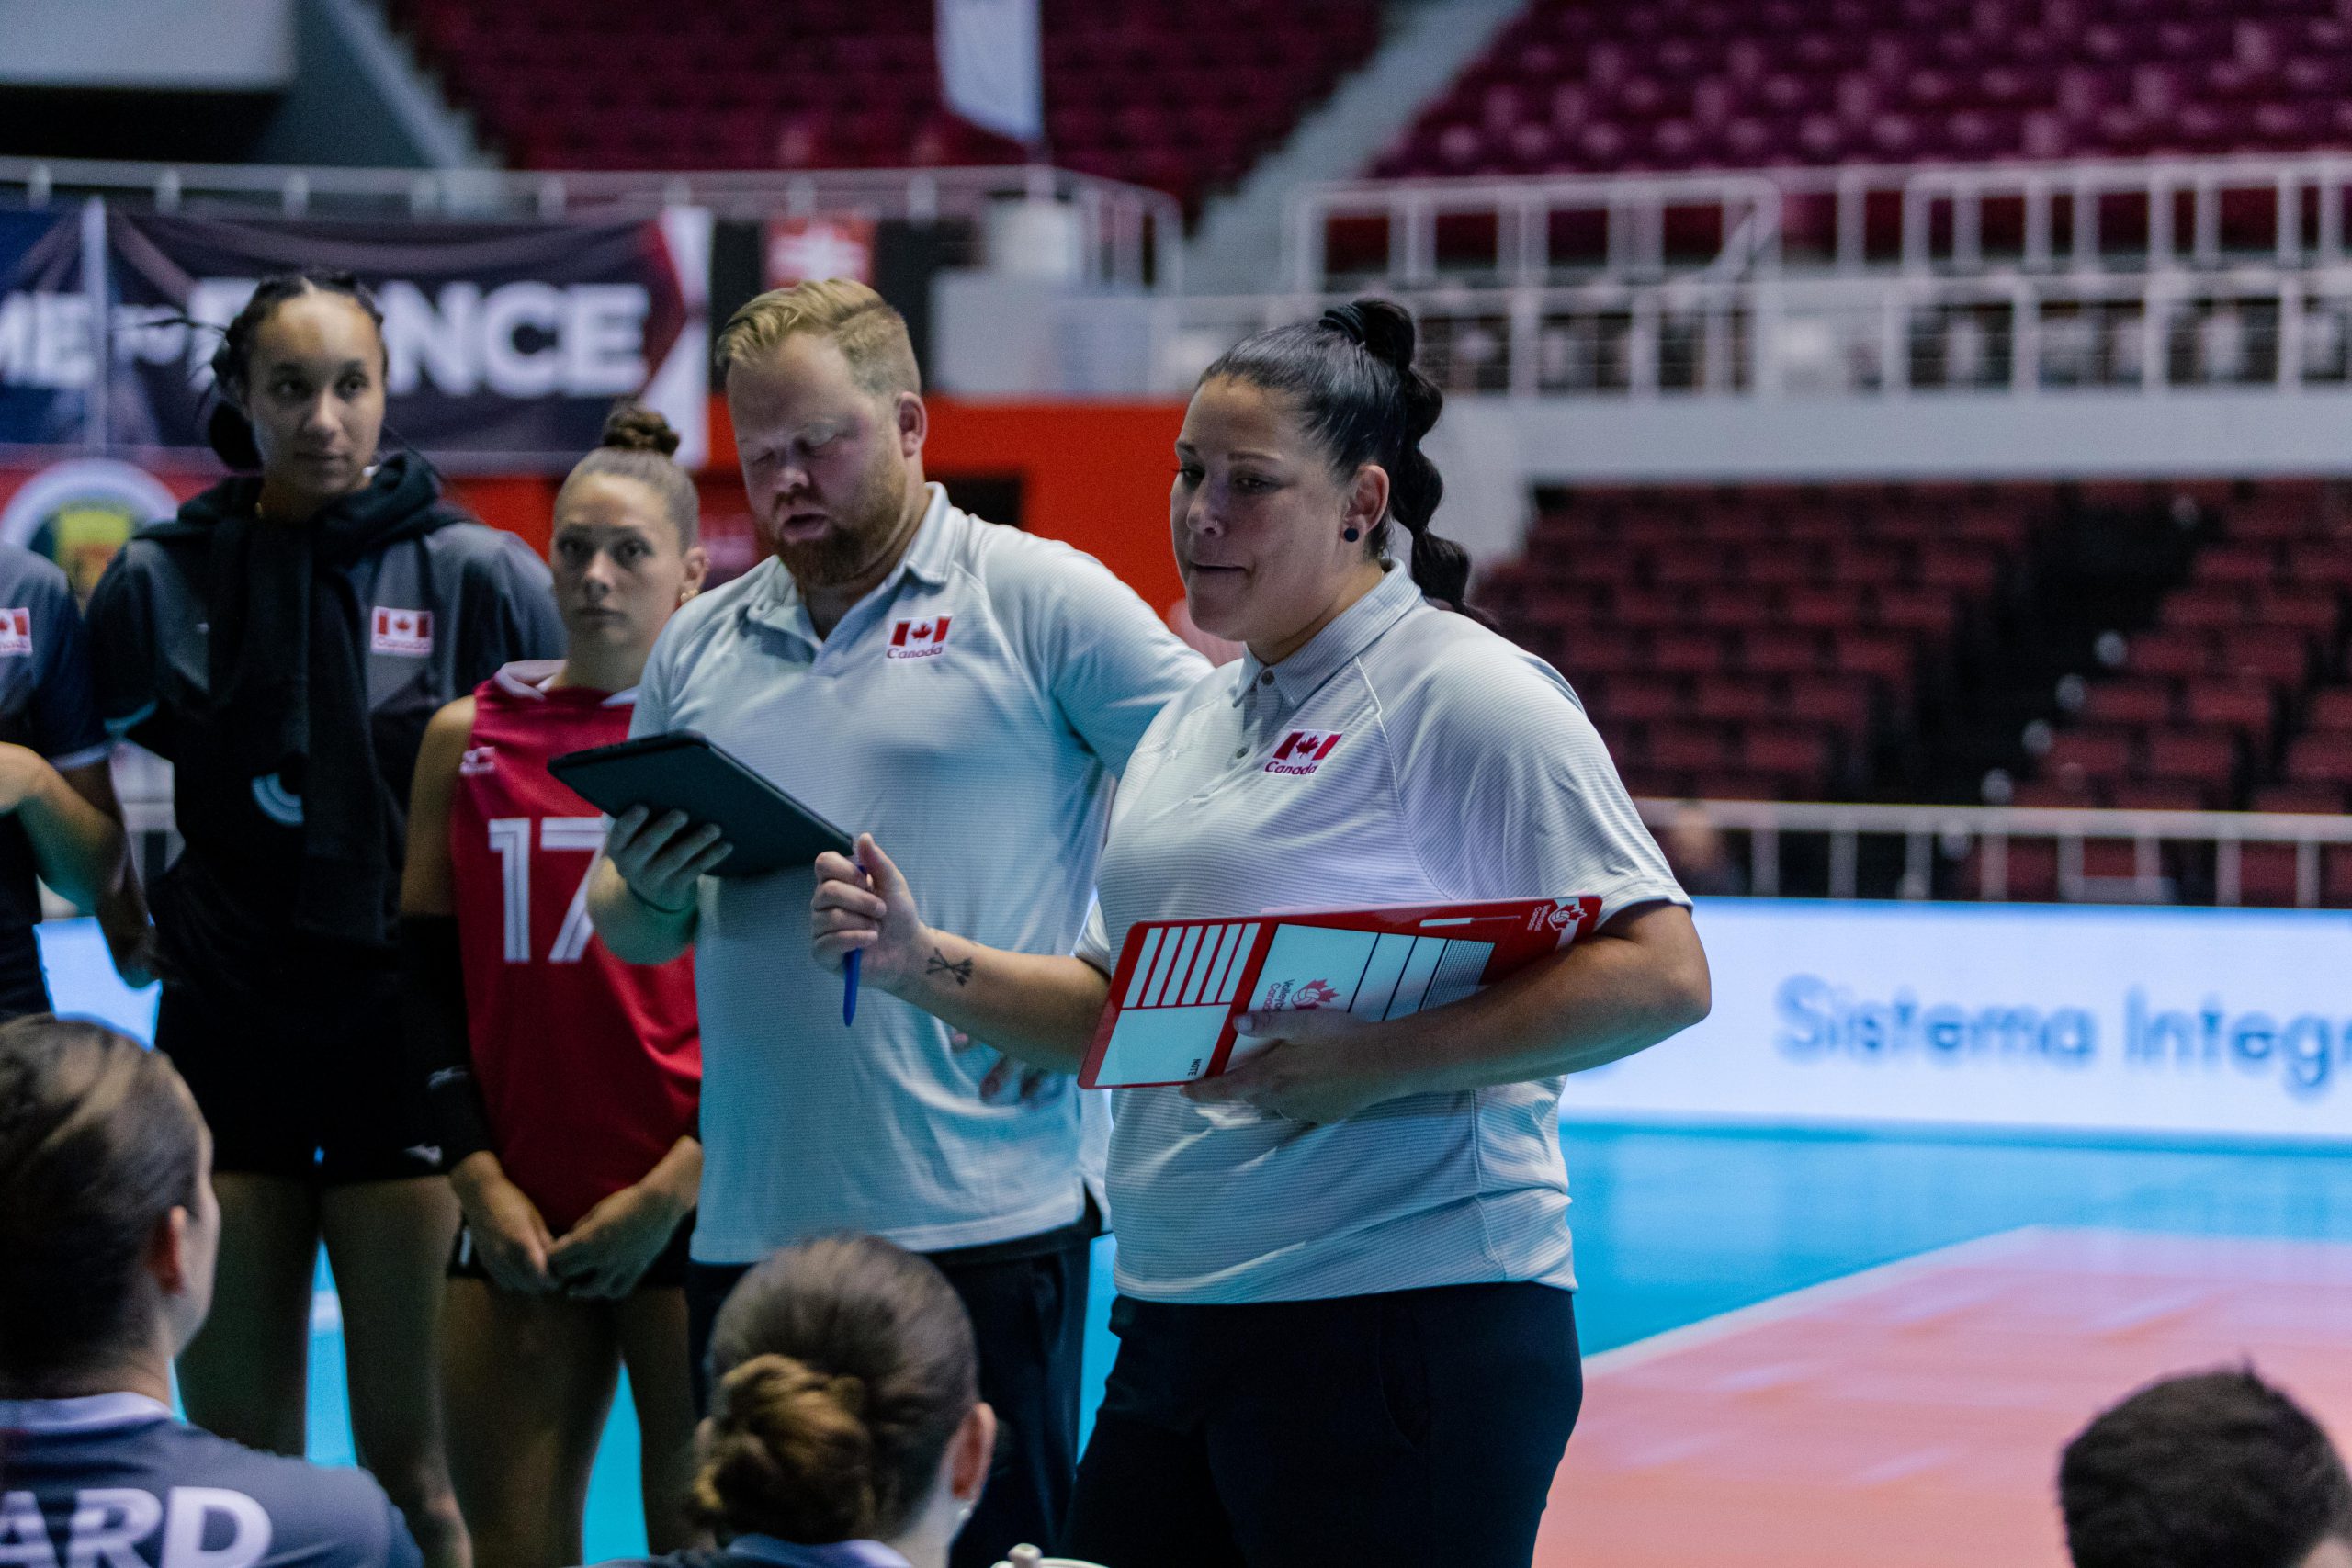 First victory for Canada in the Women’s Pan American Cup against Costa Rica 